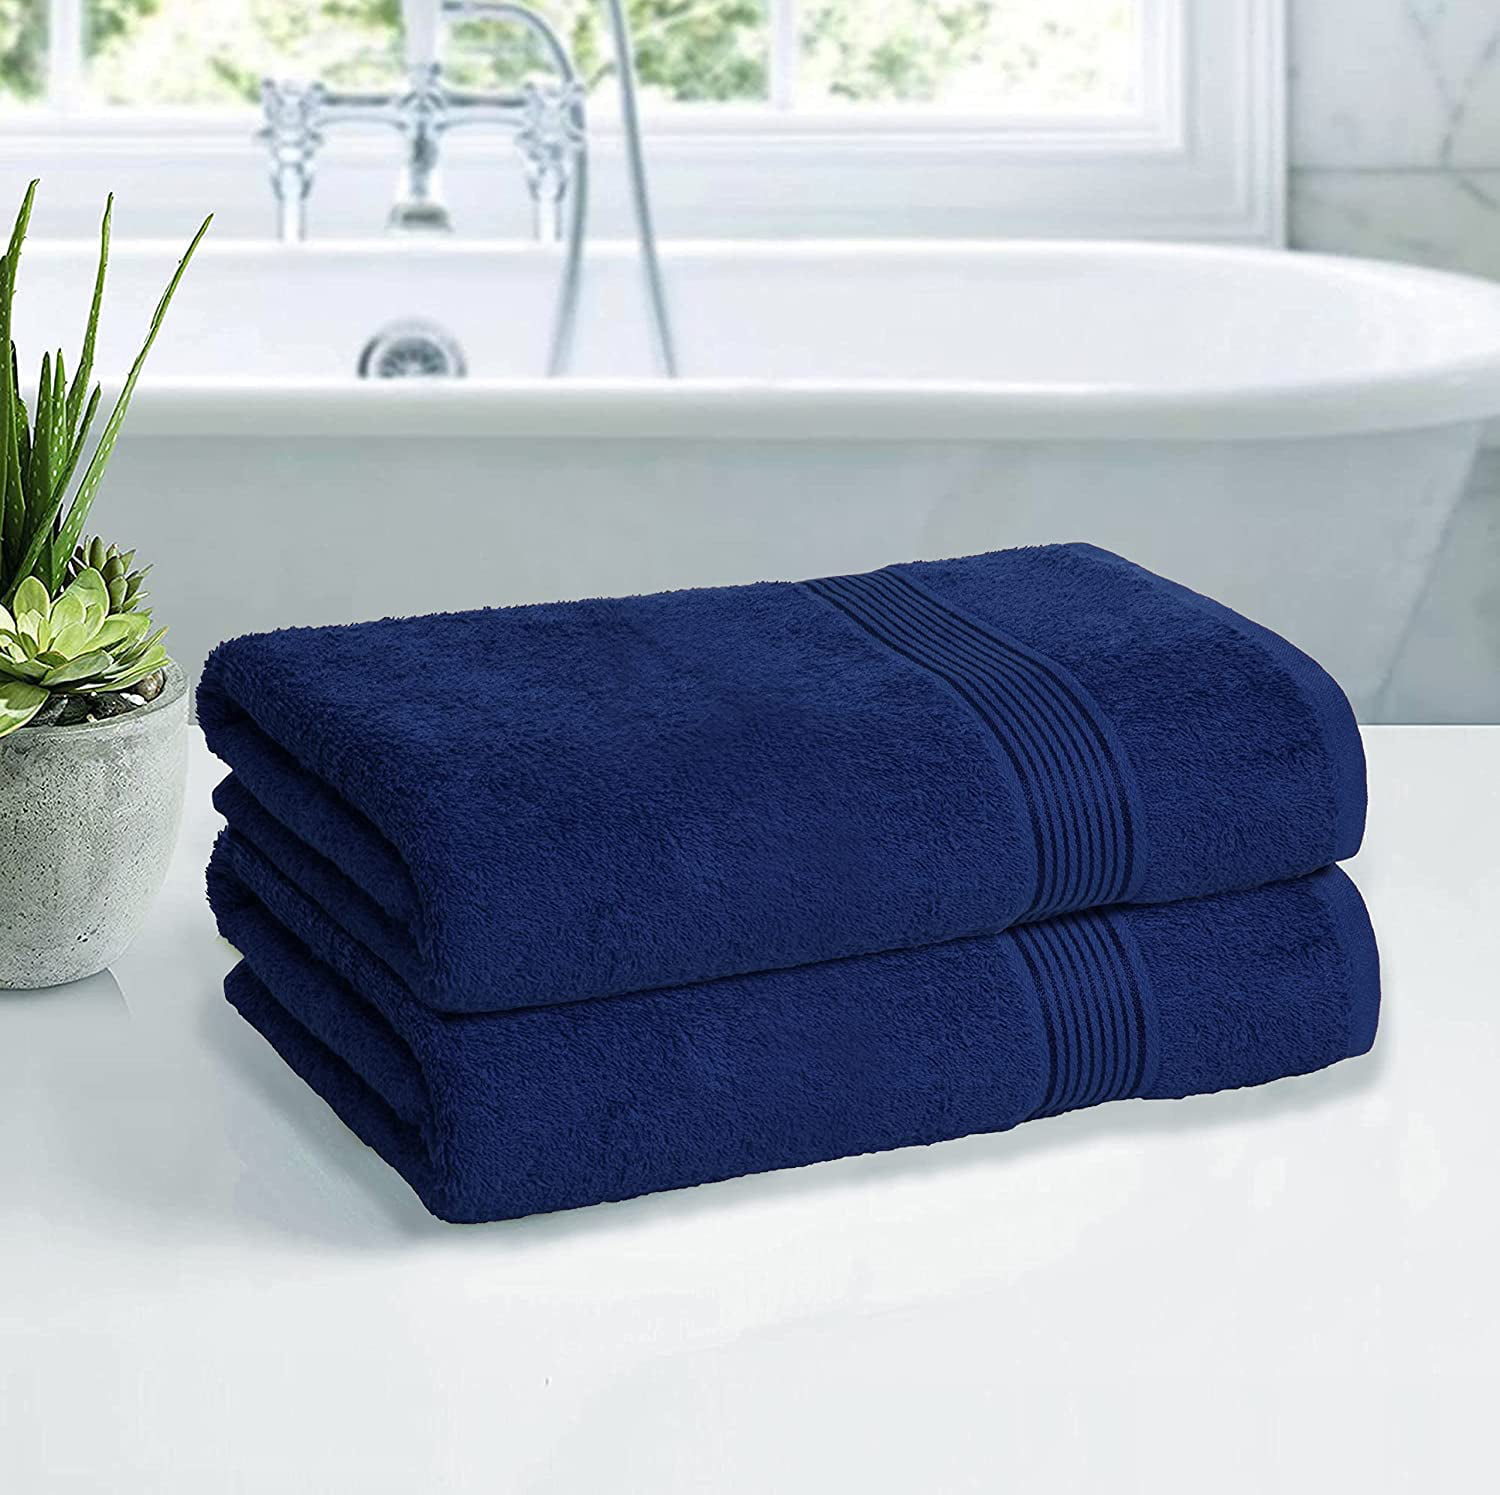 CRAFTBERRY Luxury Bath Towels| 100% Cotton| Ultra Soft, Plush, Thick,  Fluffy, Highly Absorbent, Quick Dry| Home, Gym, Pool, Hotel, Shower | Large